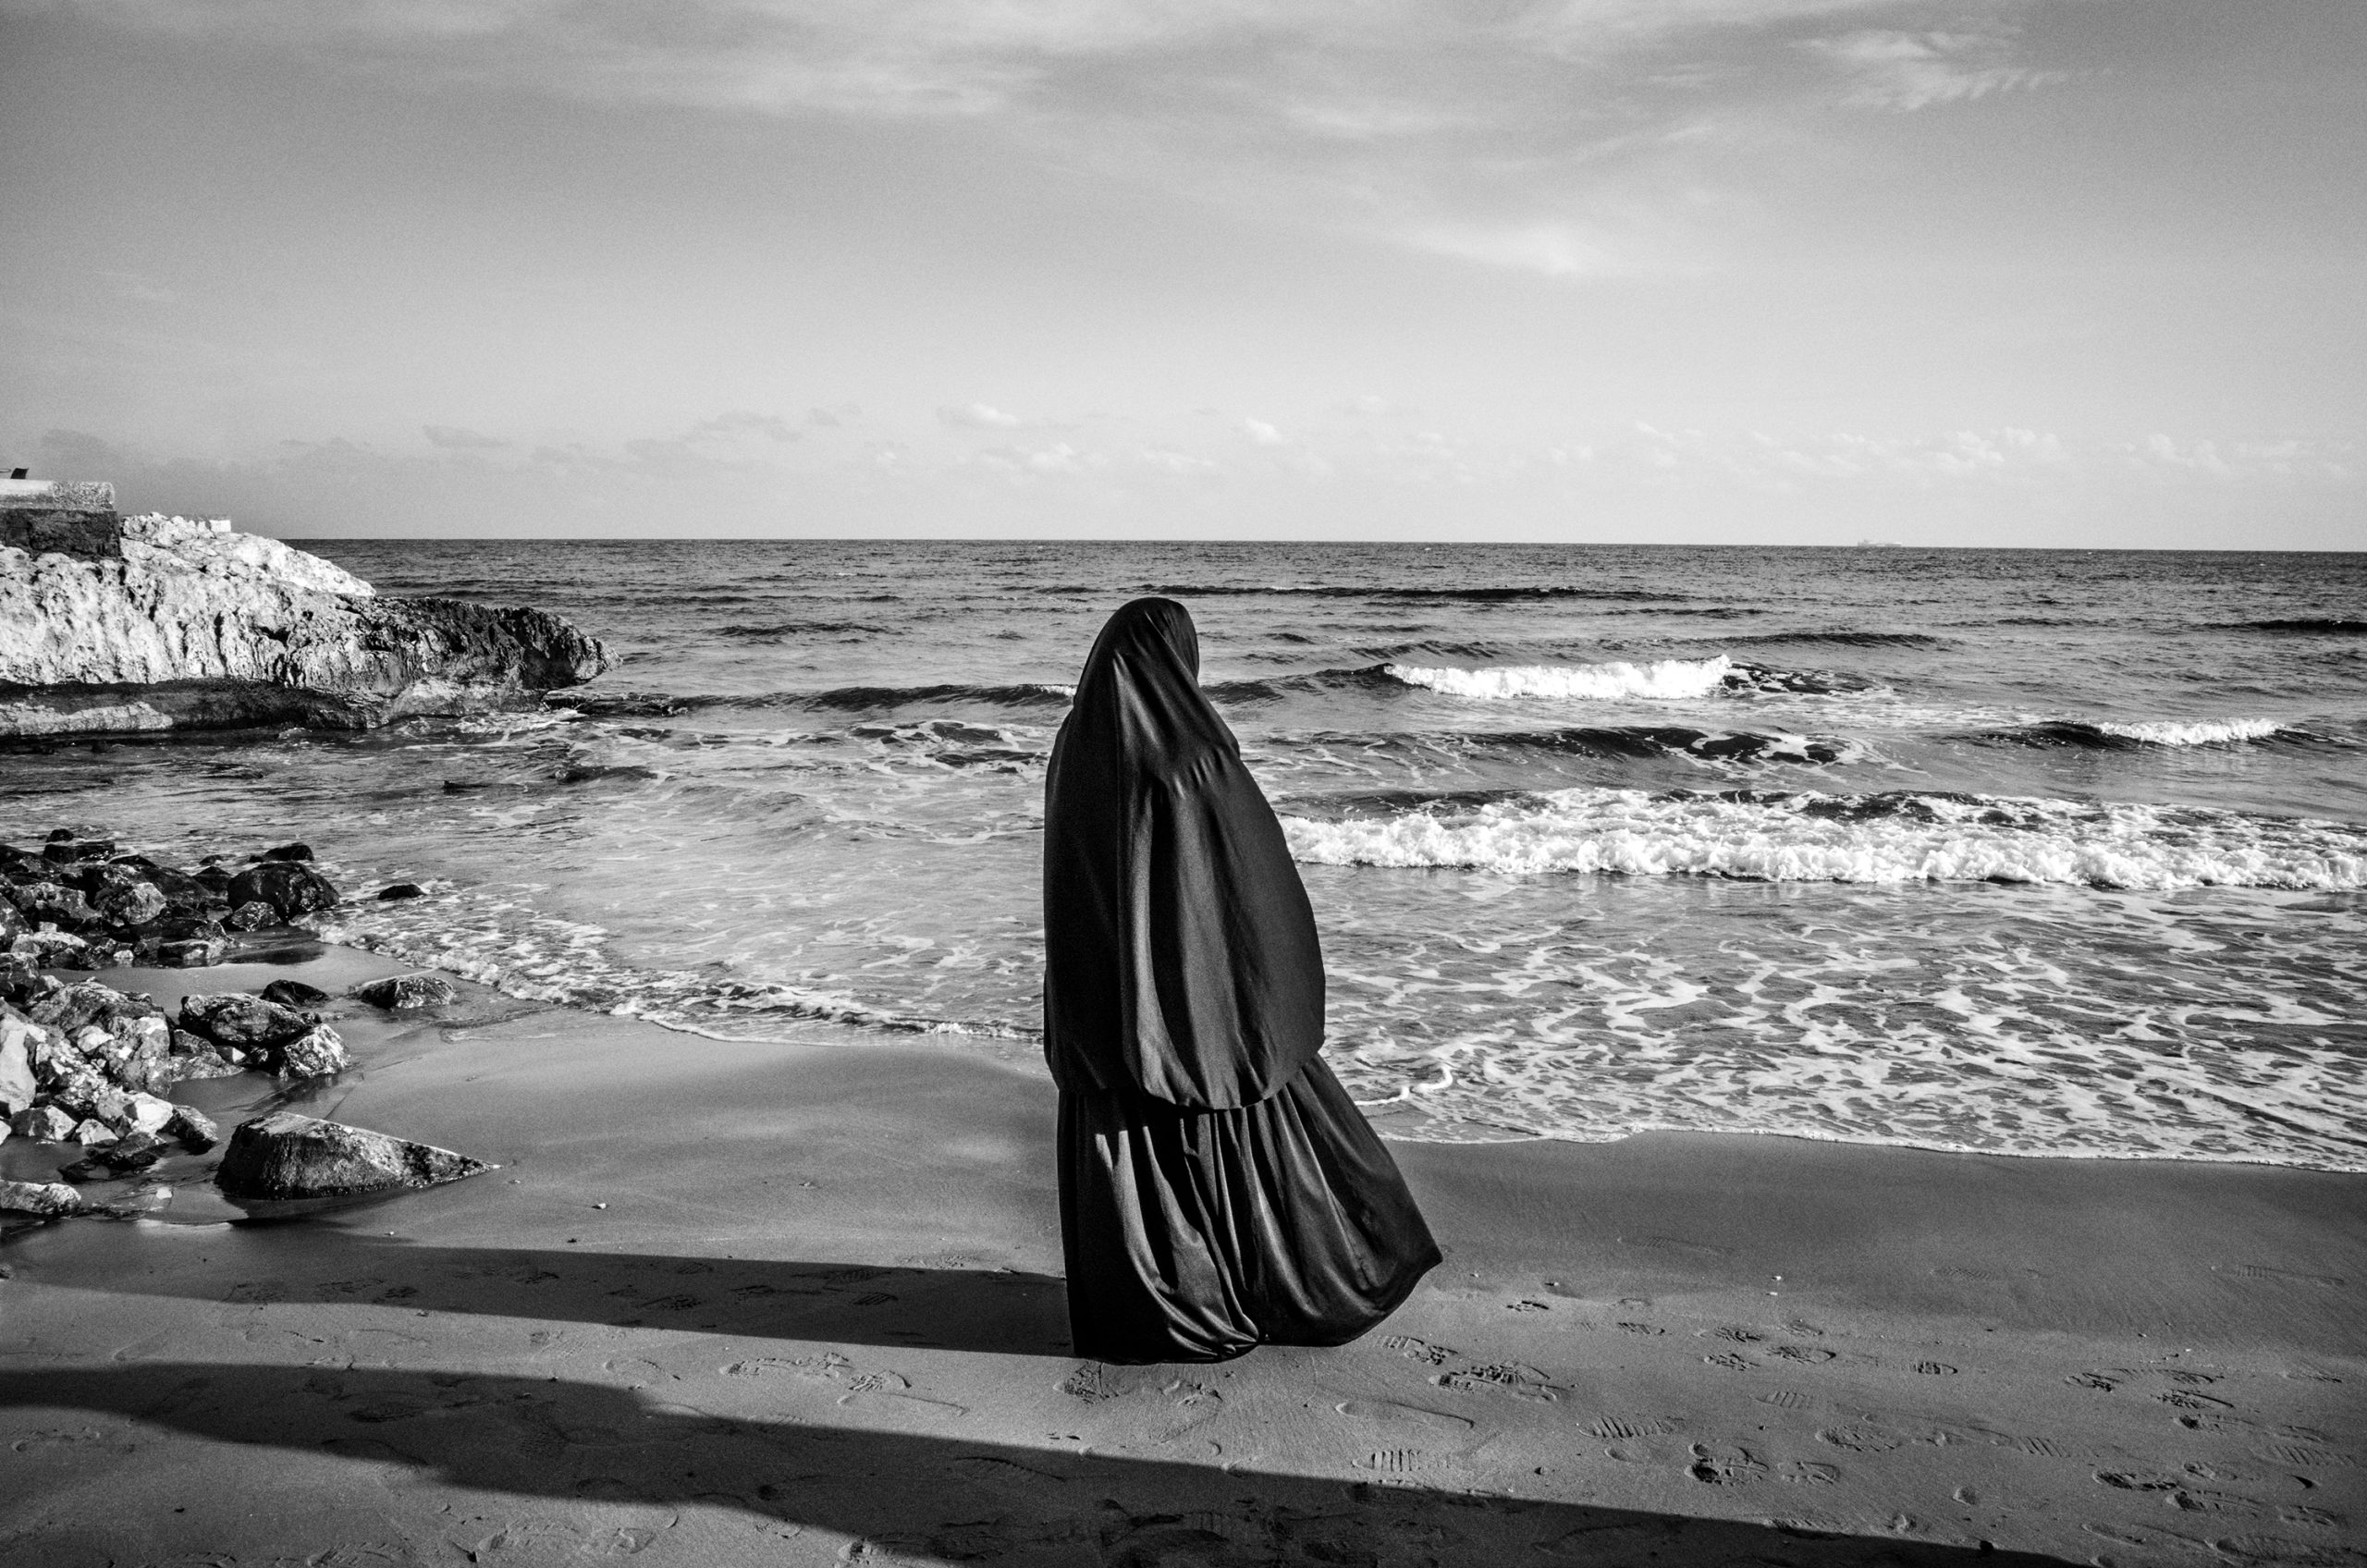 Photographing the world’s refugee crisis: interview with Fabio Bucciarelli – Amateur Photographer